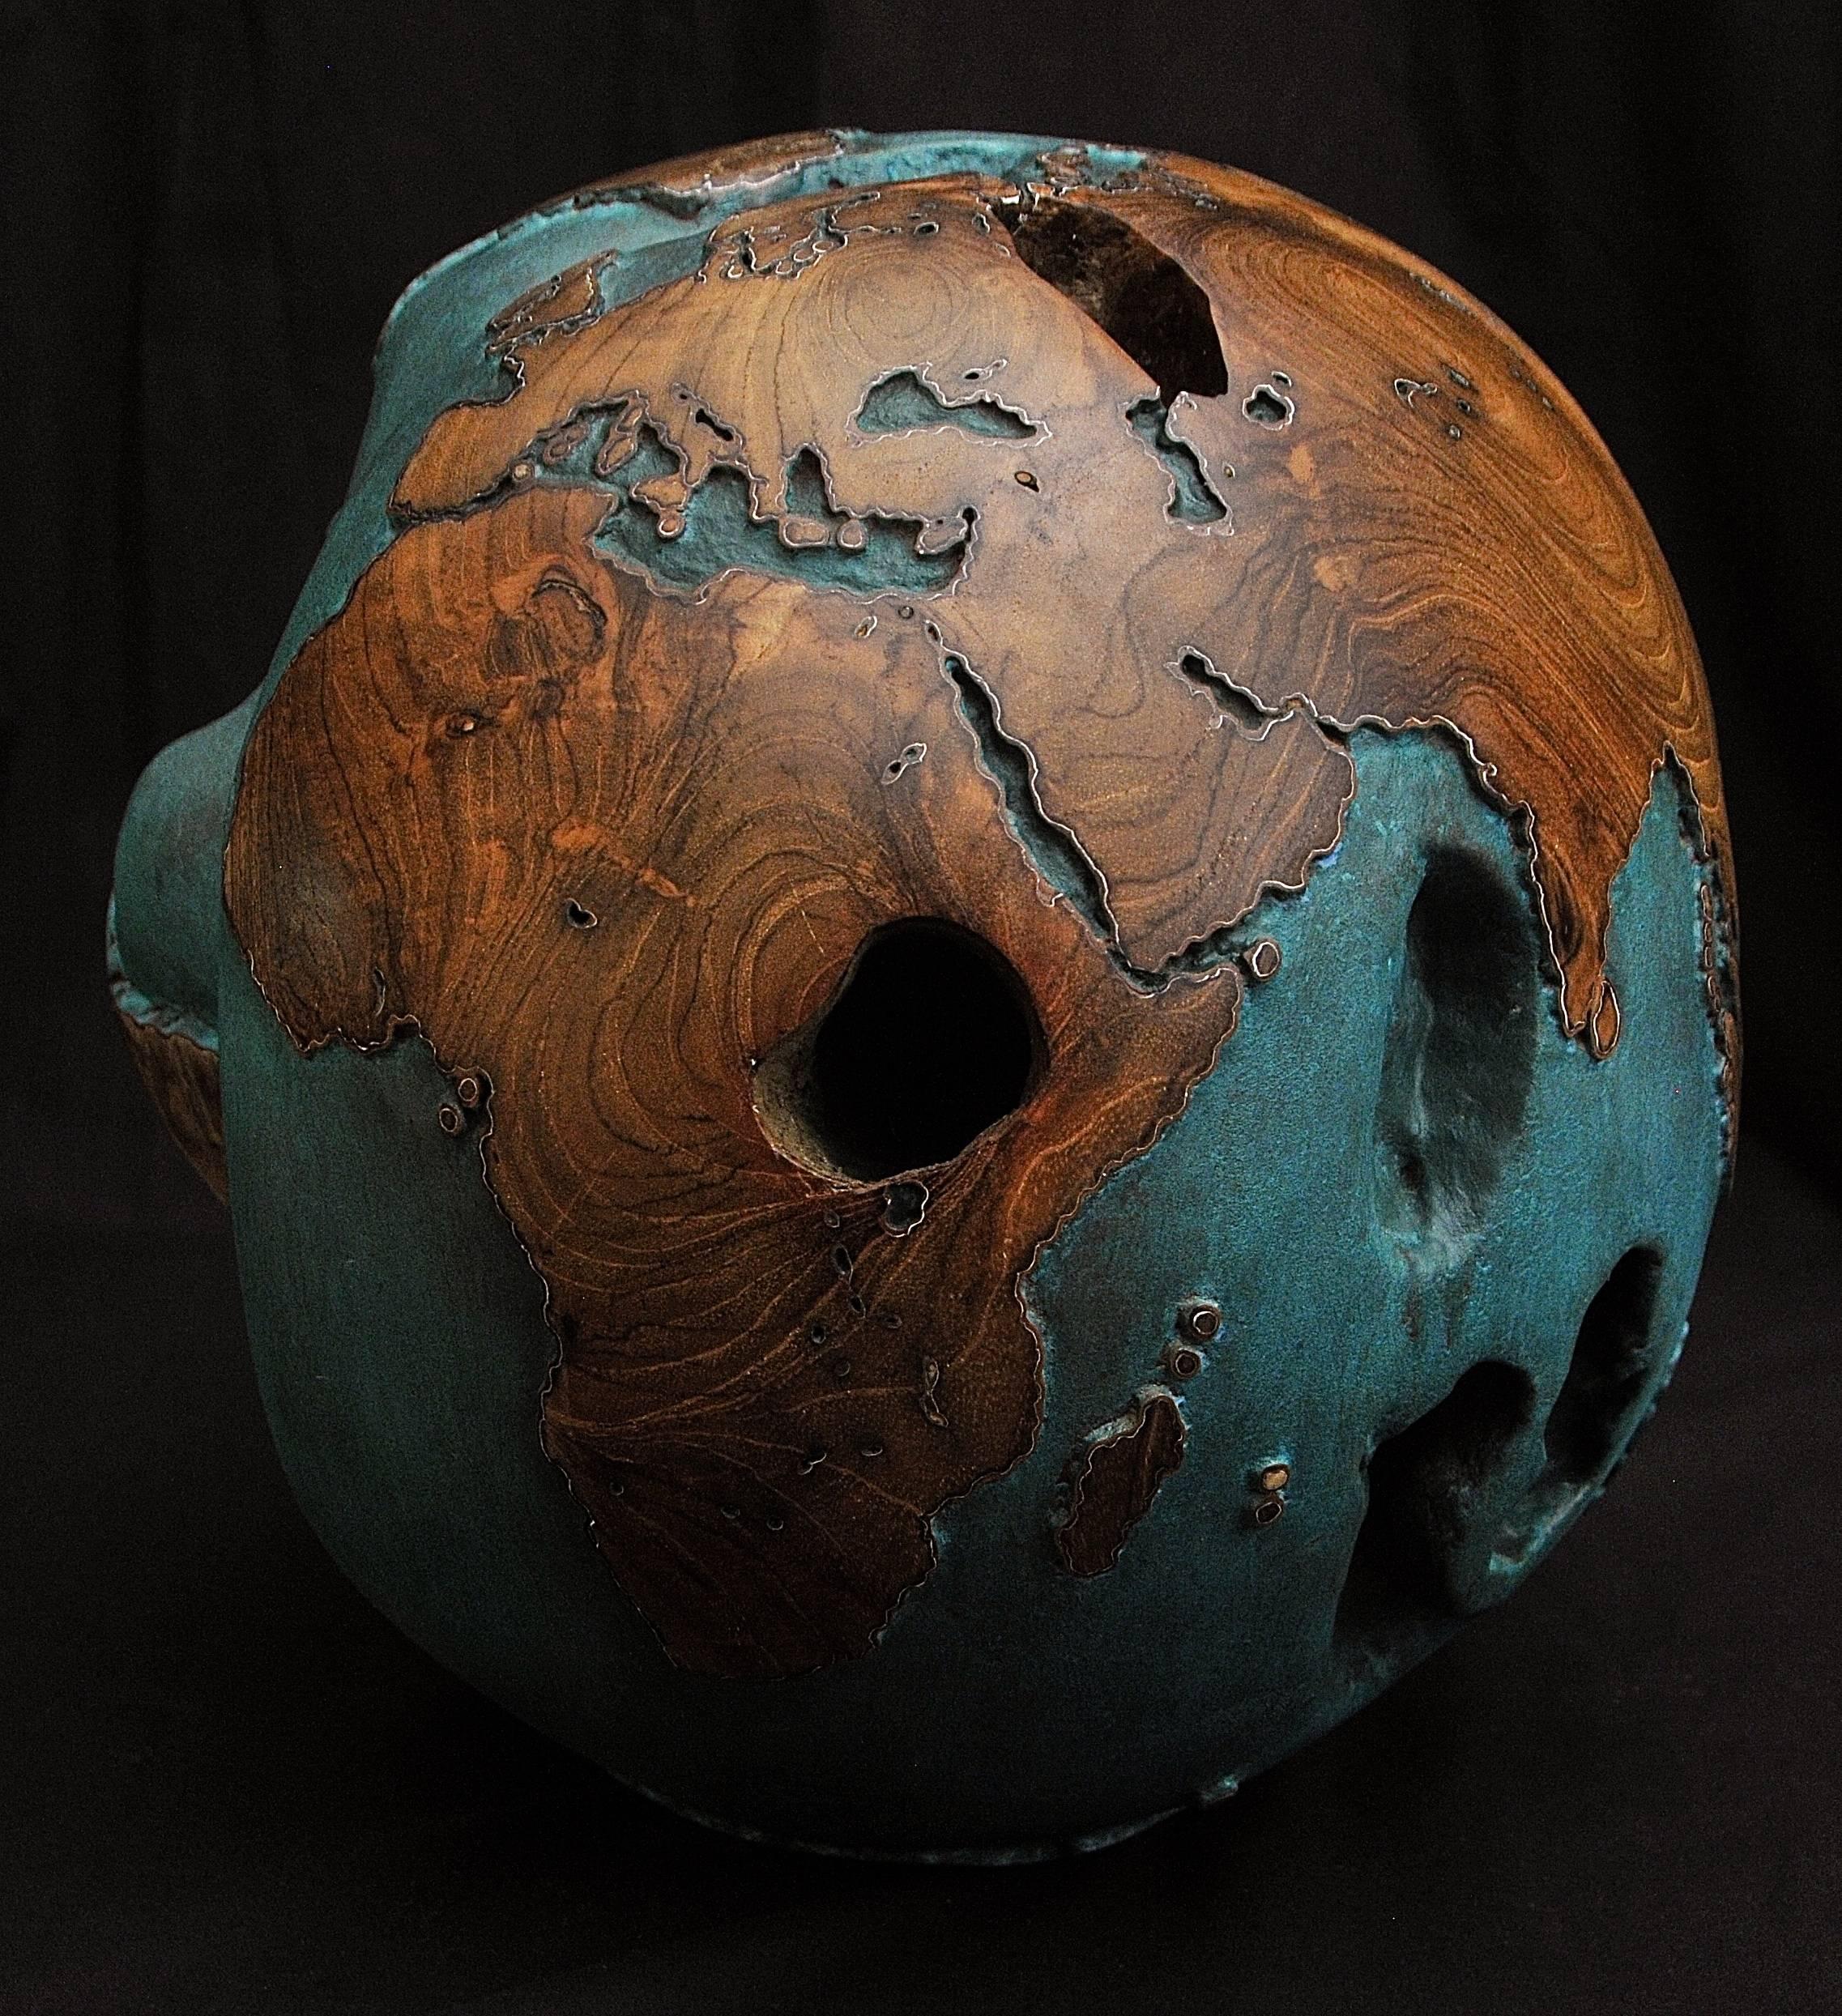 Measures: 30 cm globe from teak root
Hand-carved
Natural finishing on continents
Cooper inlay on oceans or green patine
Mounted on turning Platina.